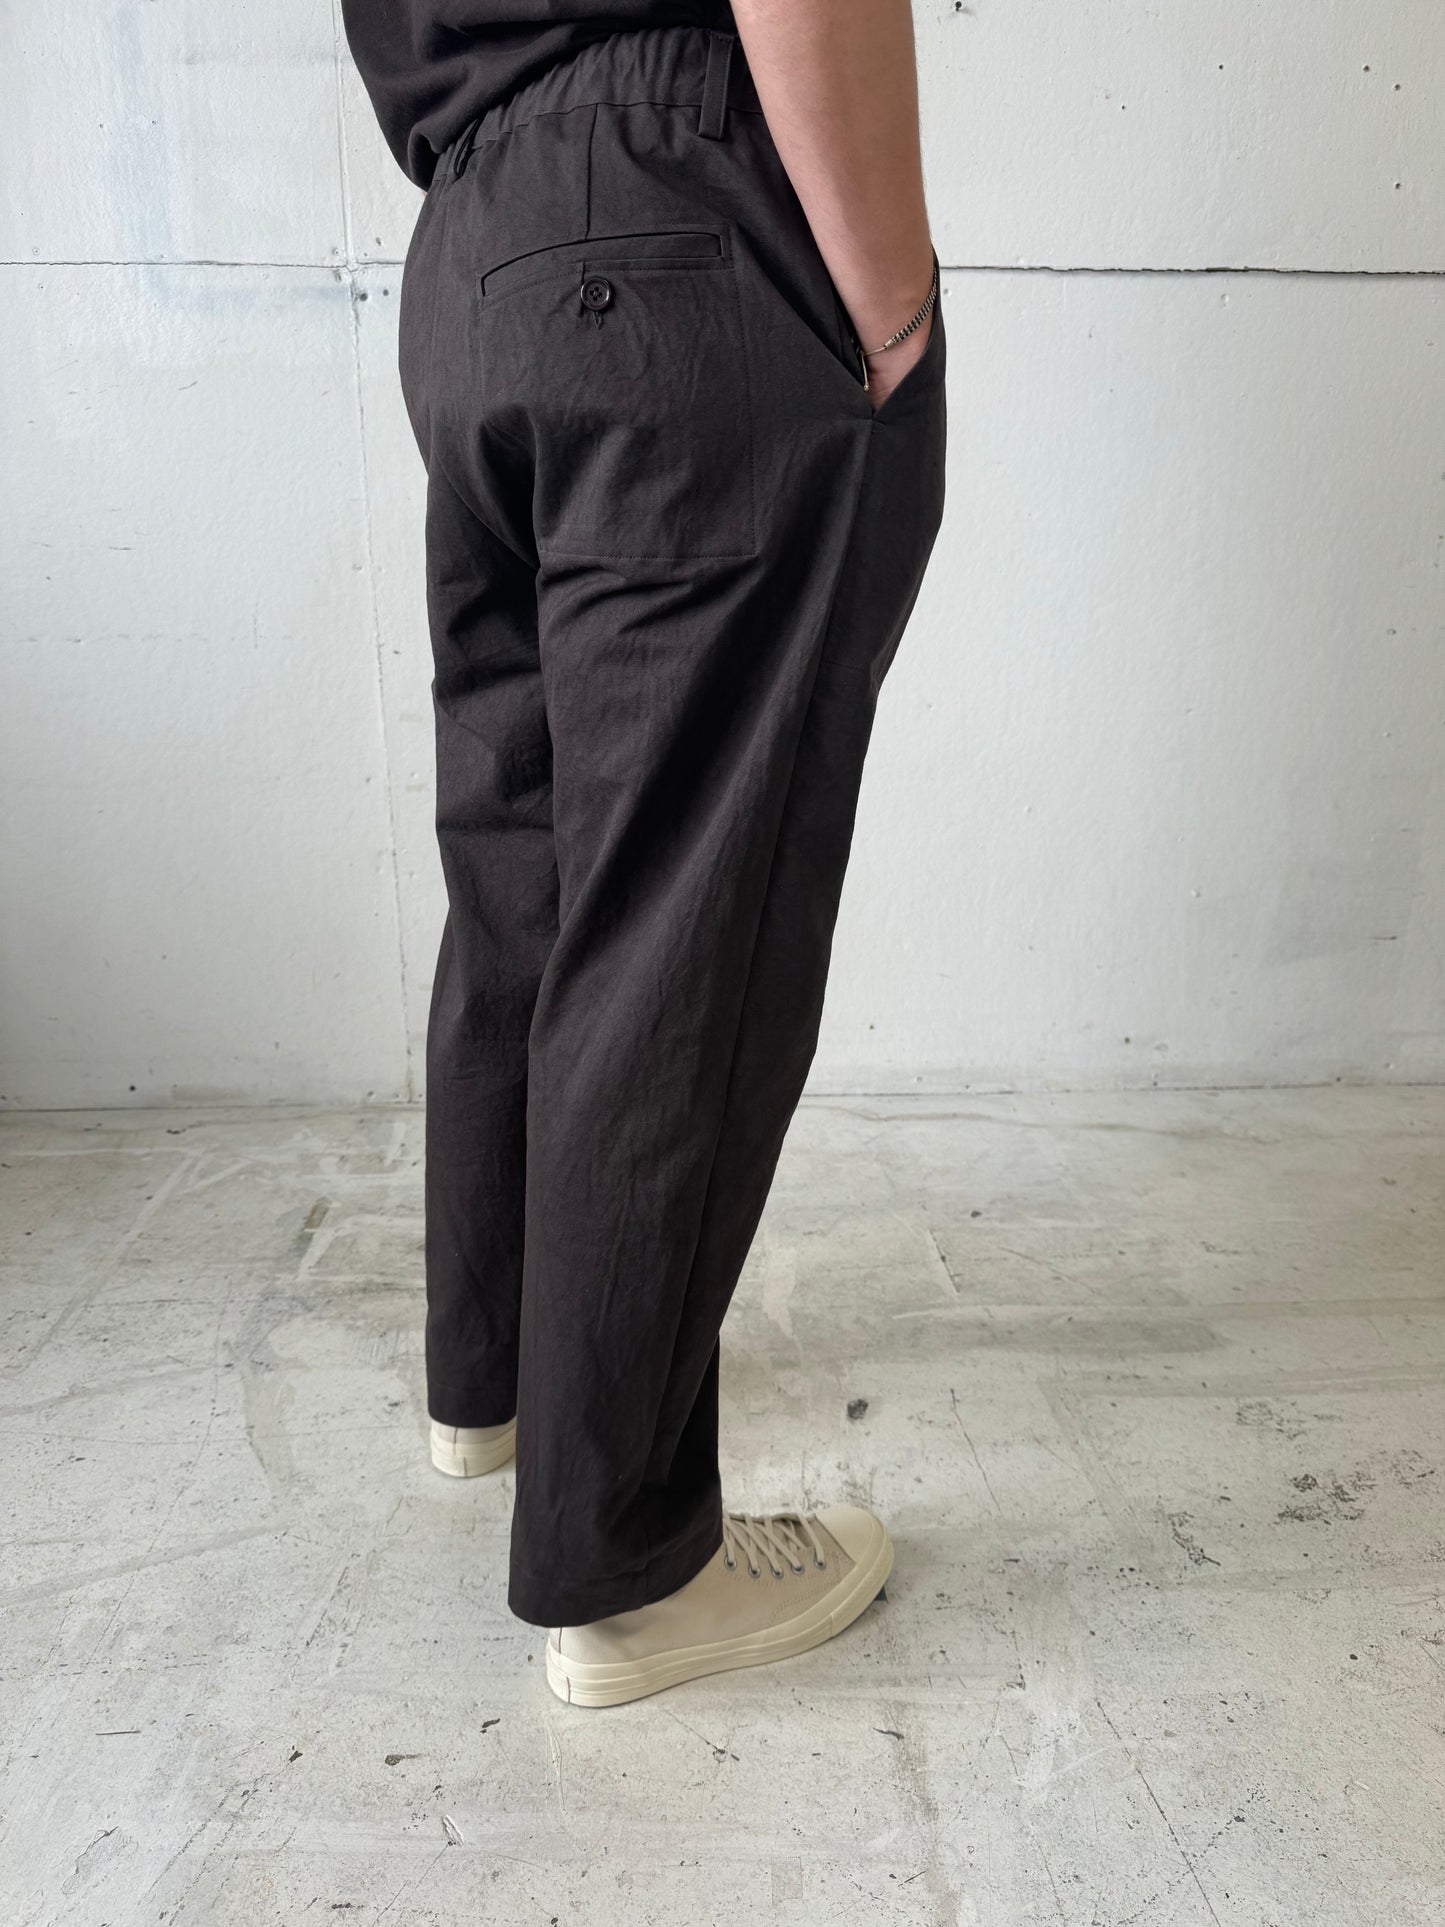 Work Pants in Heavy Cotton Twill